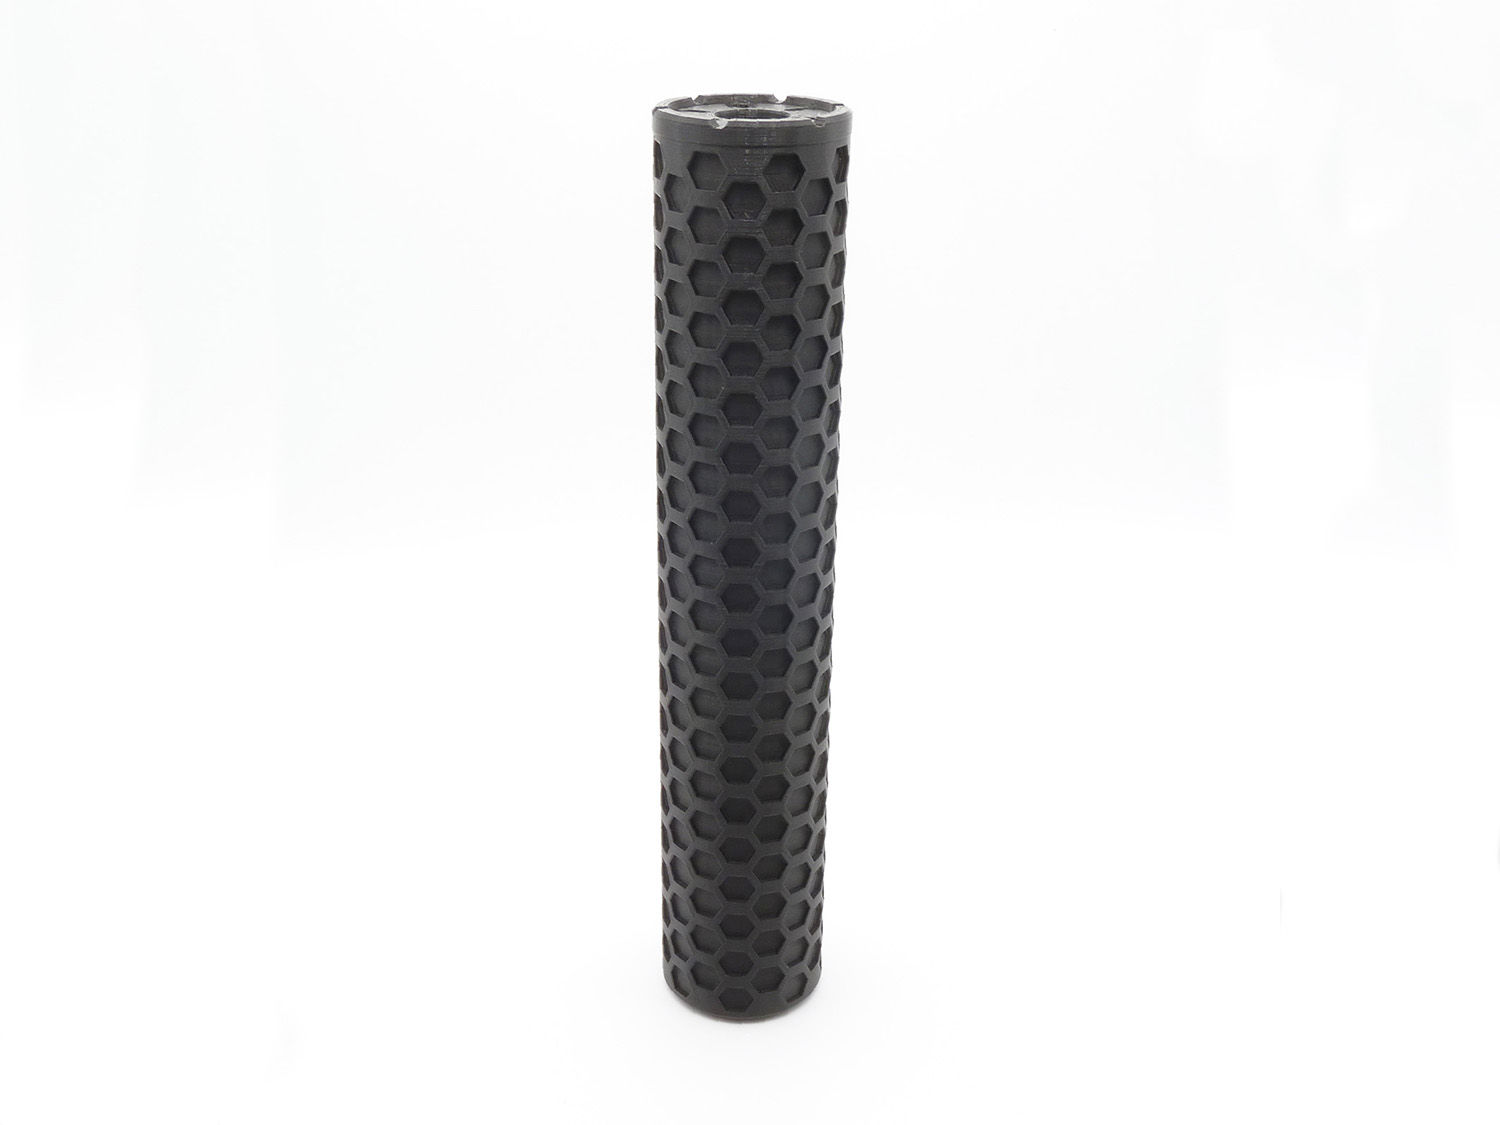 Hex-Pattern Cylindrical Silencer